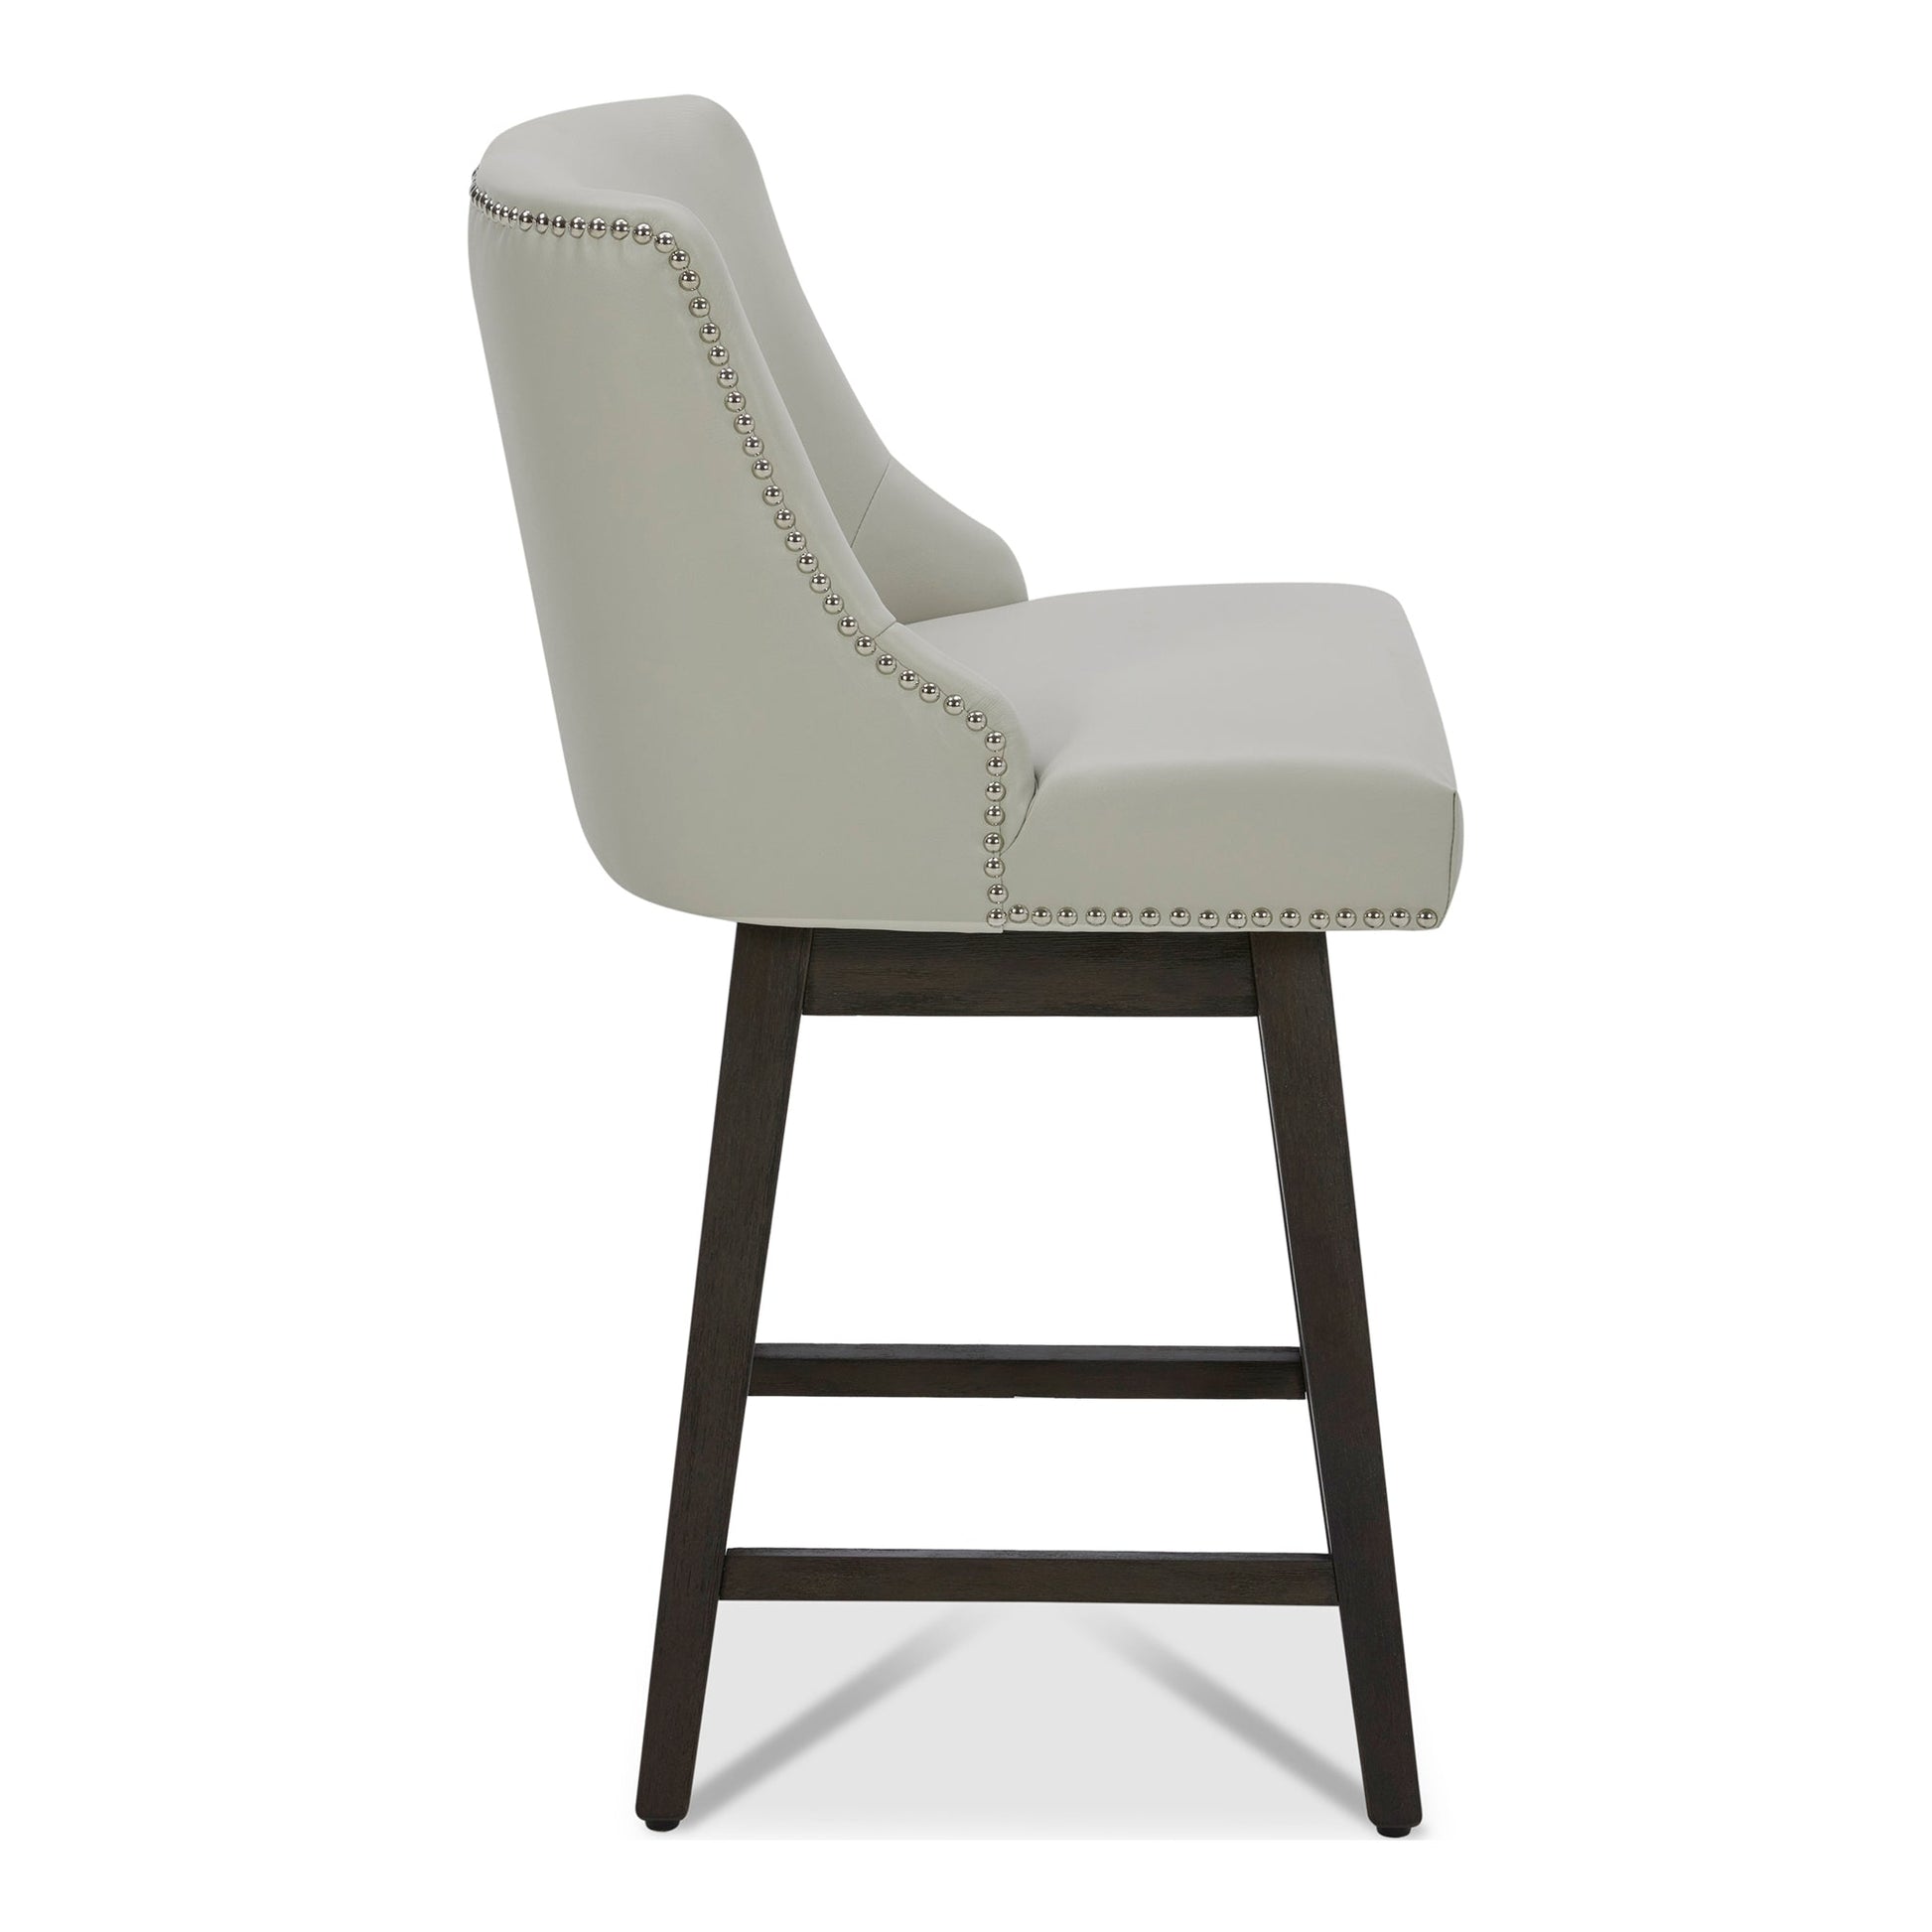 CHITA LIVING-Asher Swivel Counter Stool with Nailhead Trim-Counter Stools-Faux Leather-Light Gray-